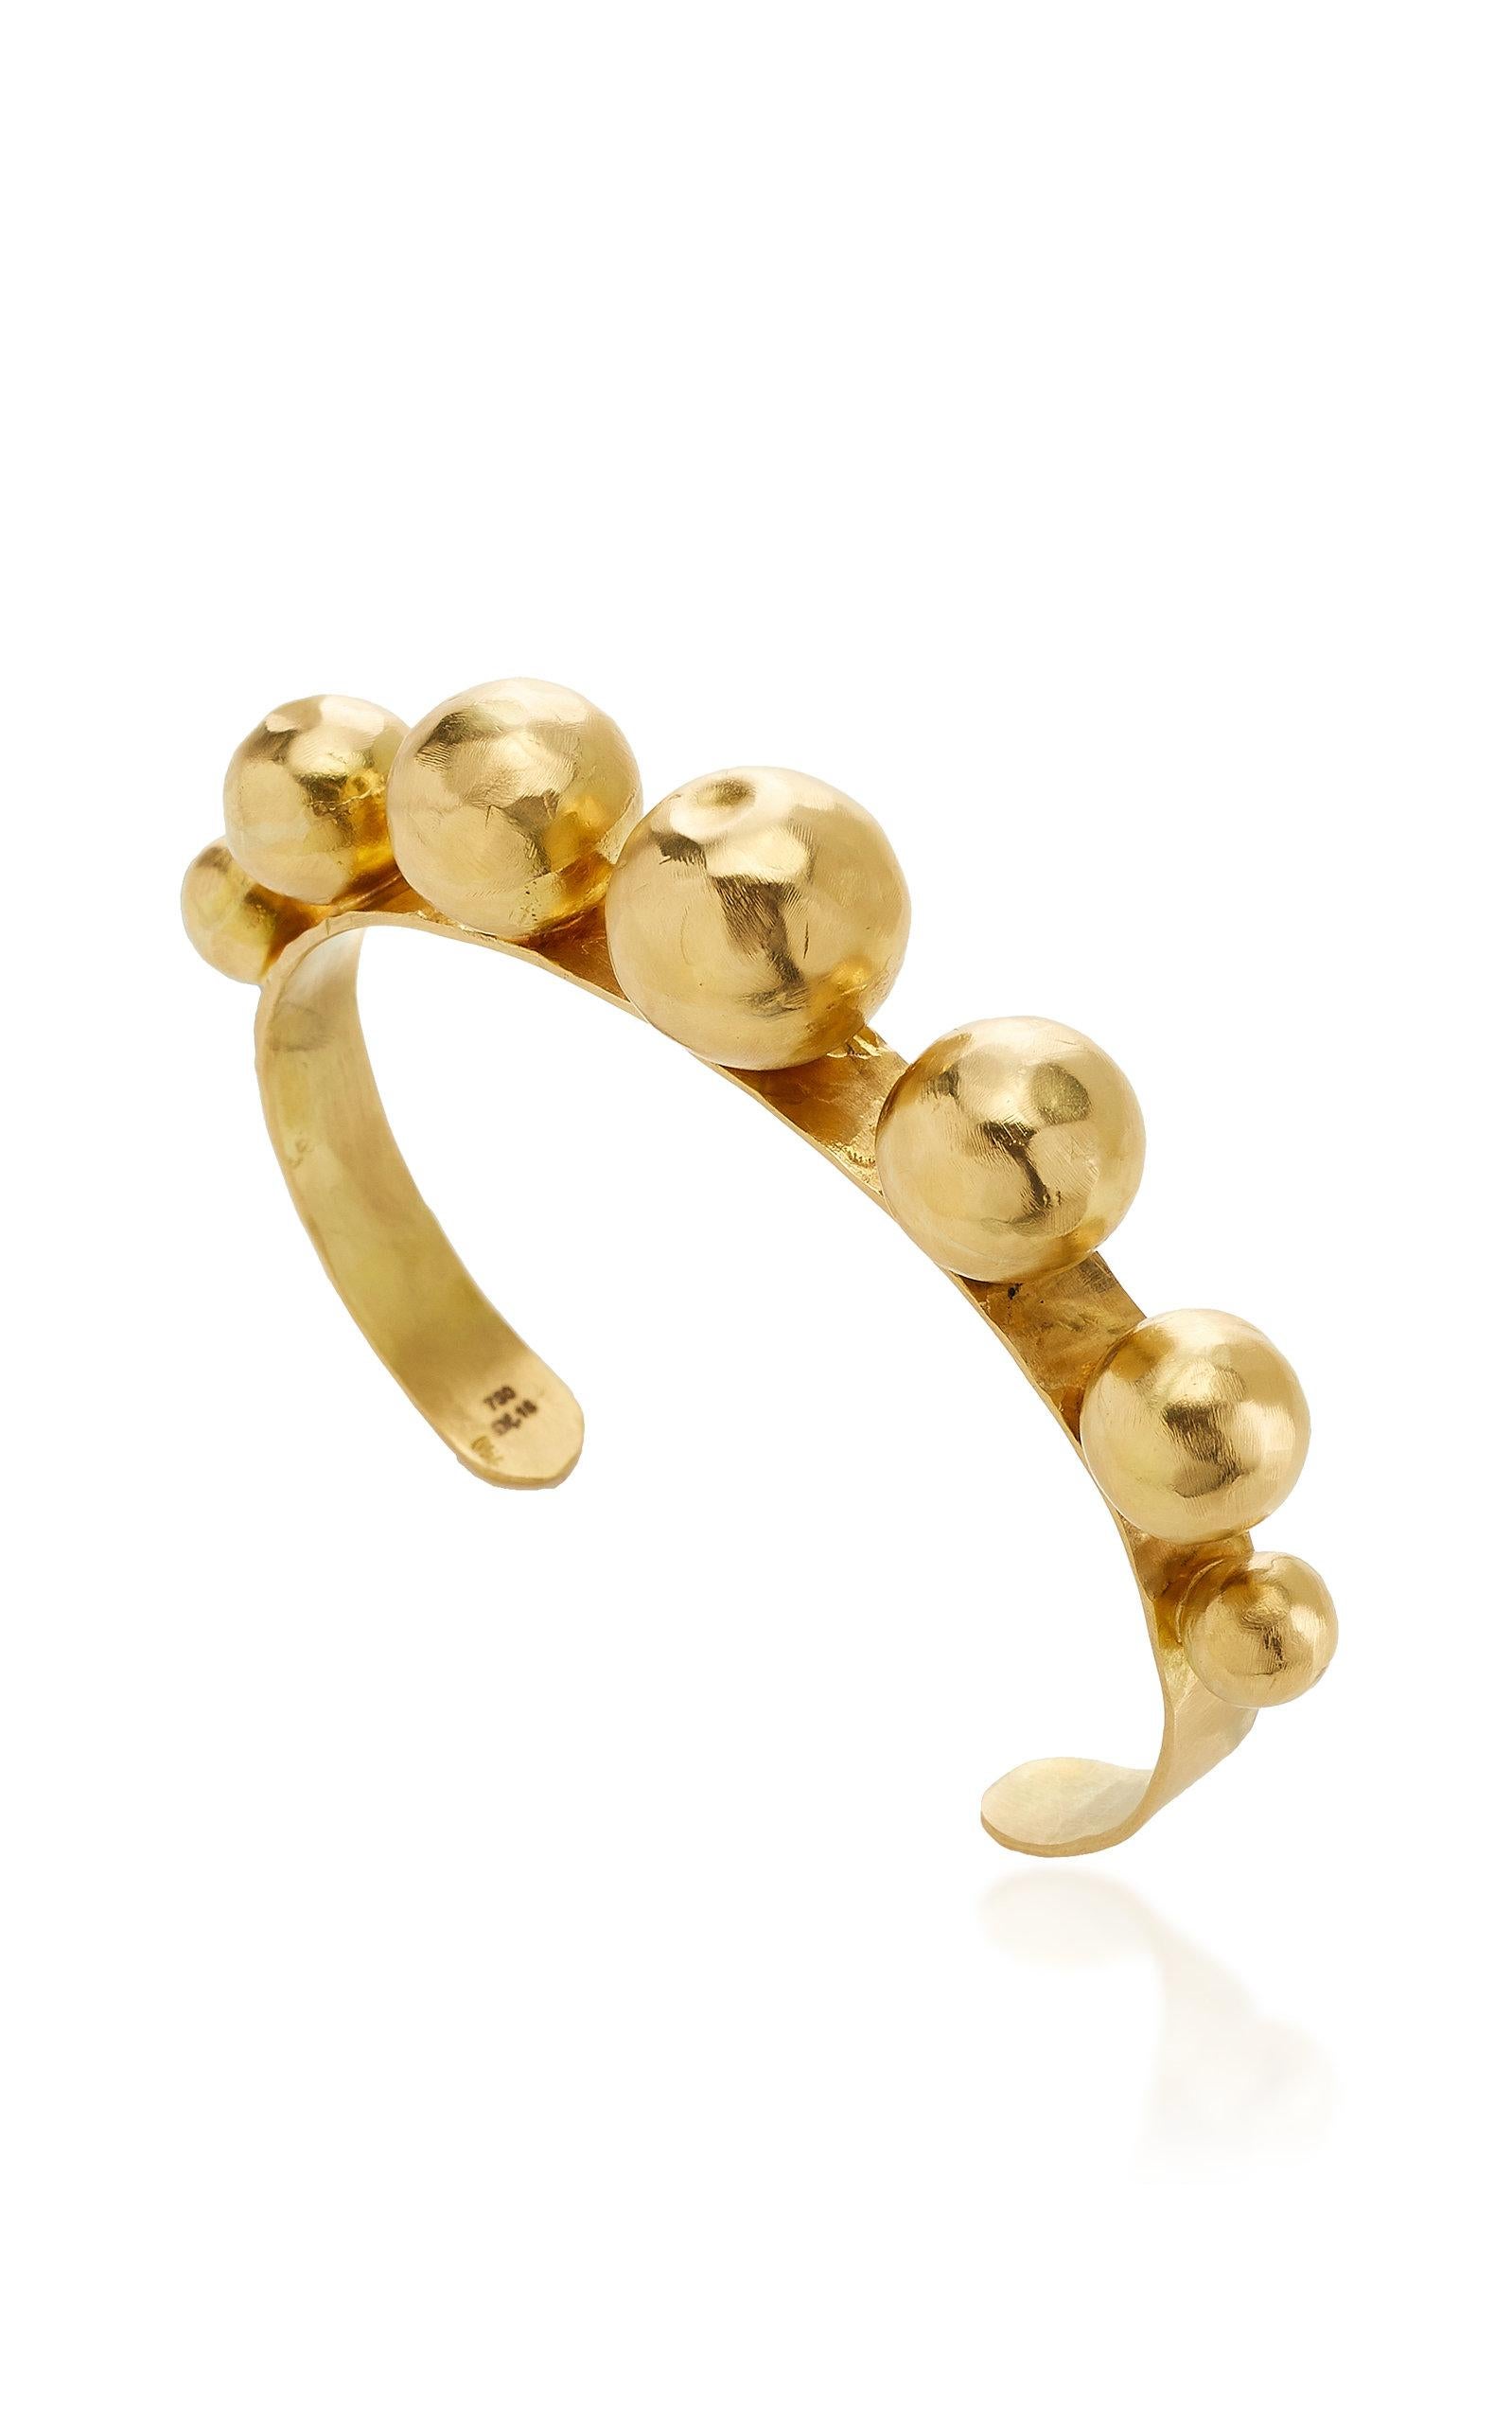 The Ball cuff bracelet is designed by Christina Alexiou.
This bracelet is crafted with 18k yellow gold. The balls are hollow, thus makes this piece an easy-to-wear  piece of jewelry. The Ball bracelet is available in yellow and pink 18k gold. 